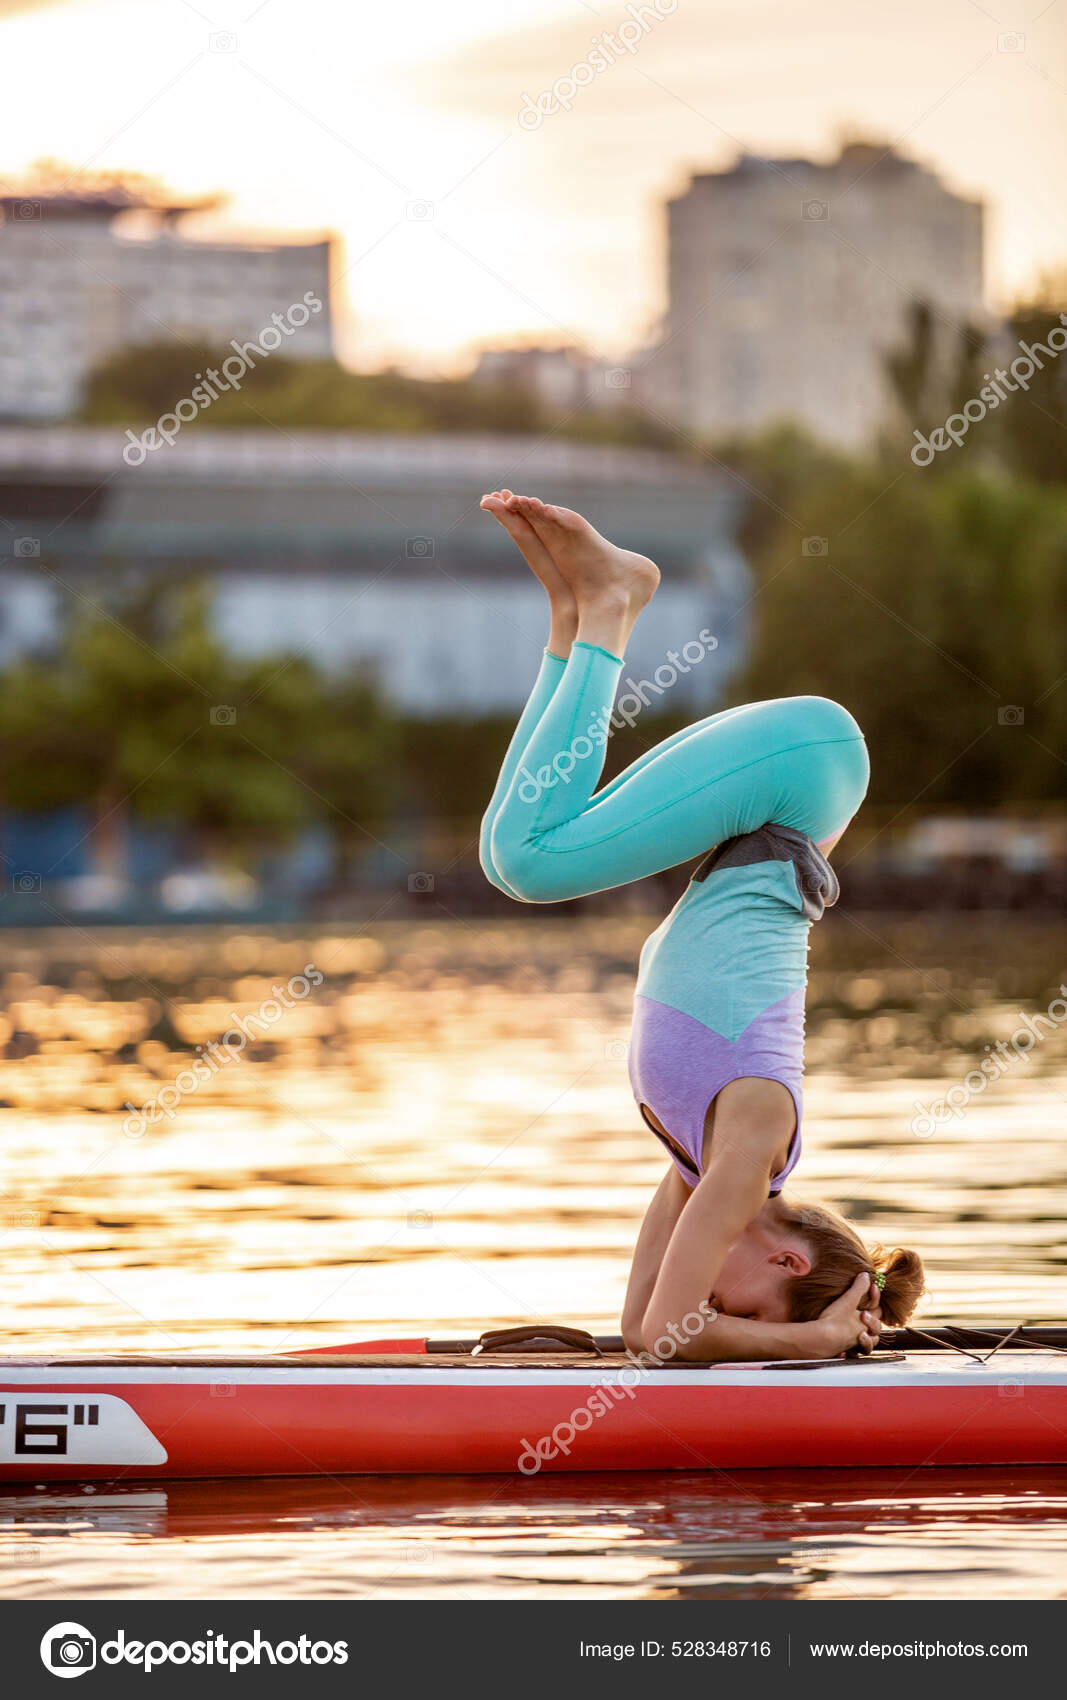 Fitness Yoga Woman Stretching On Sand. Fit Female Athlete Doing